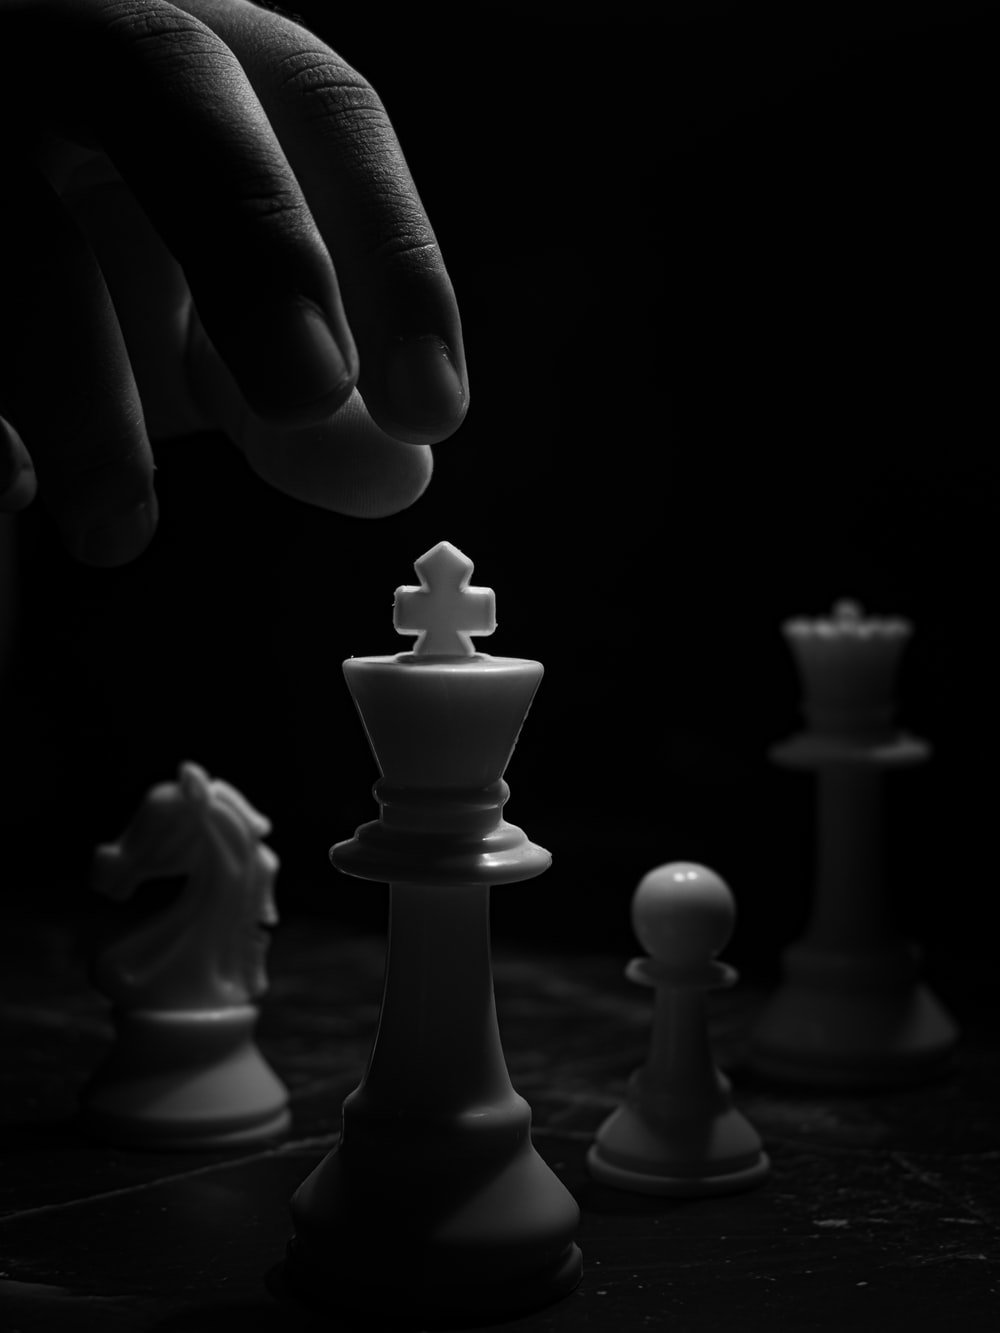 Chess King Picture. Download Free Image